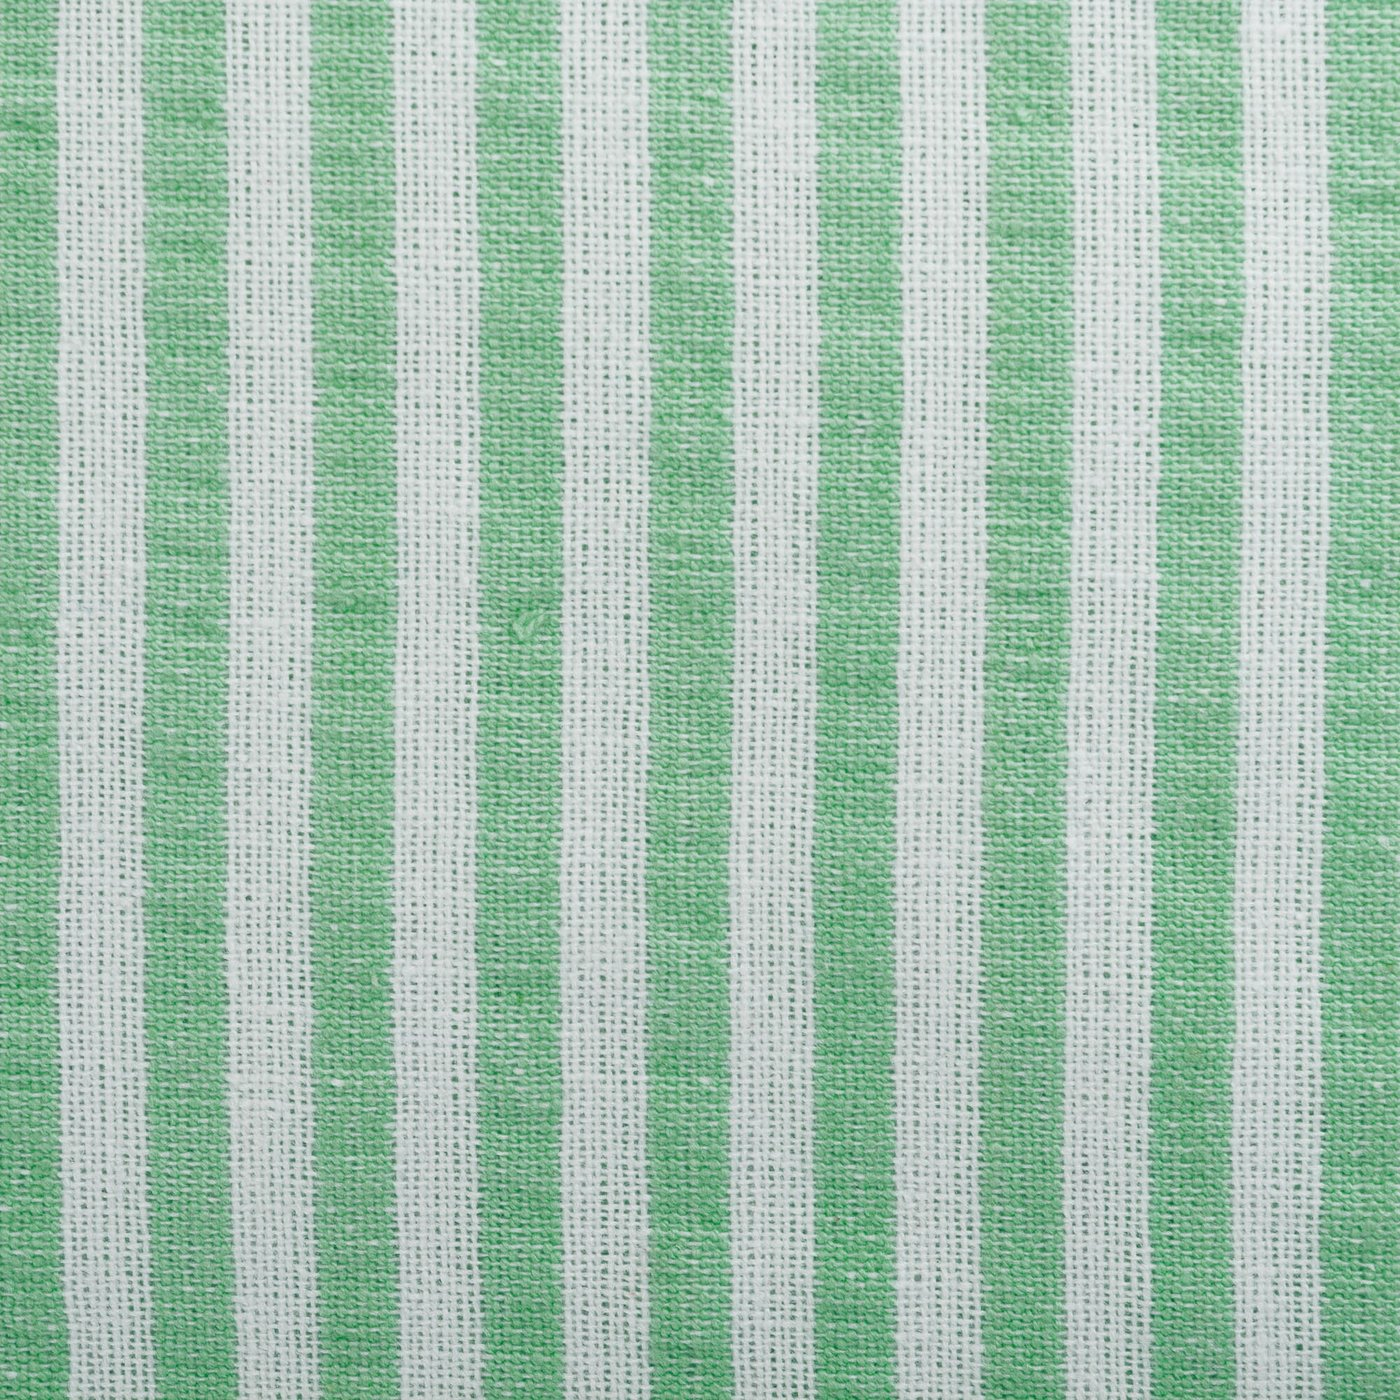 Bright Green Striped Seersucker Tablecloth - 60 x 104  inches